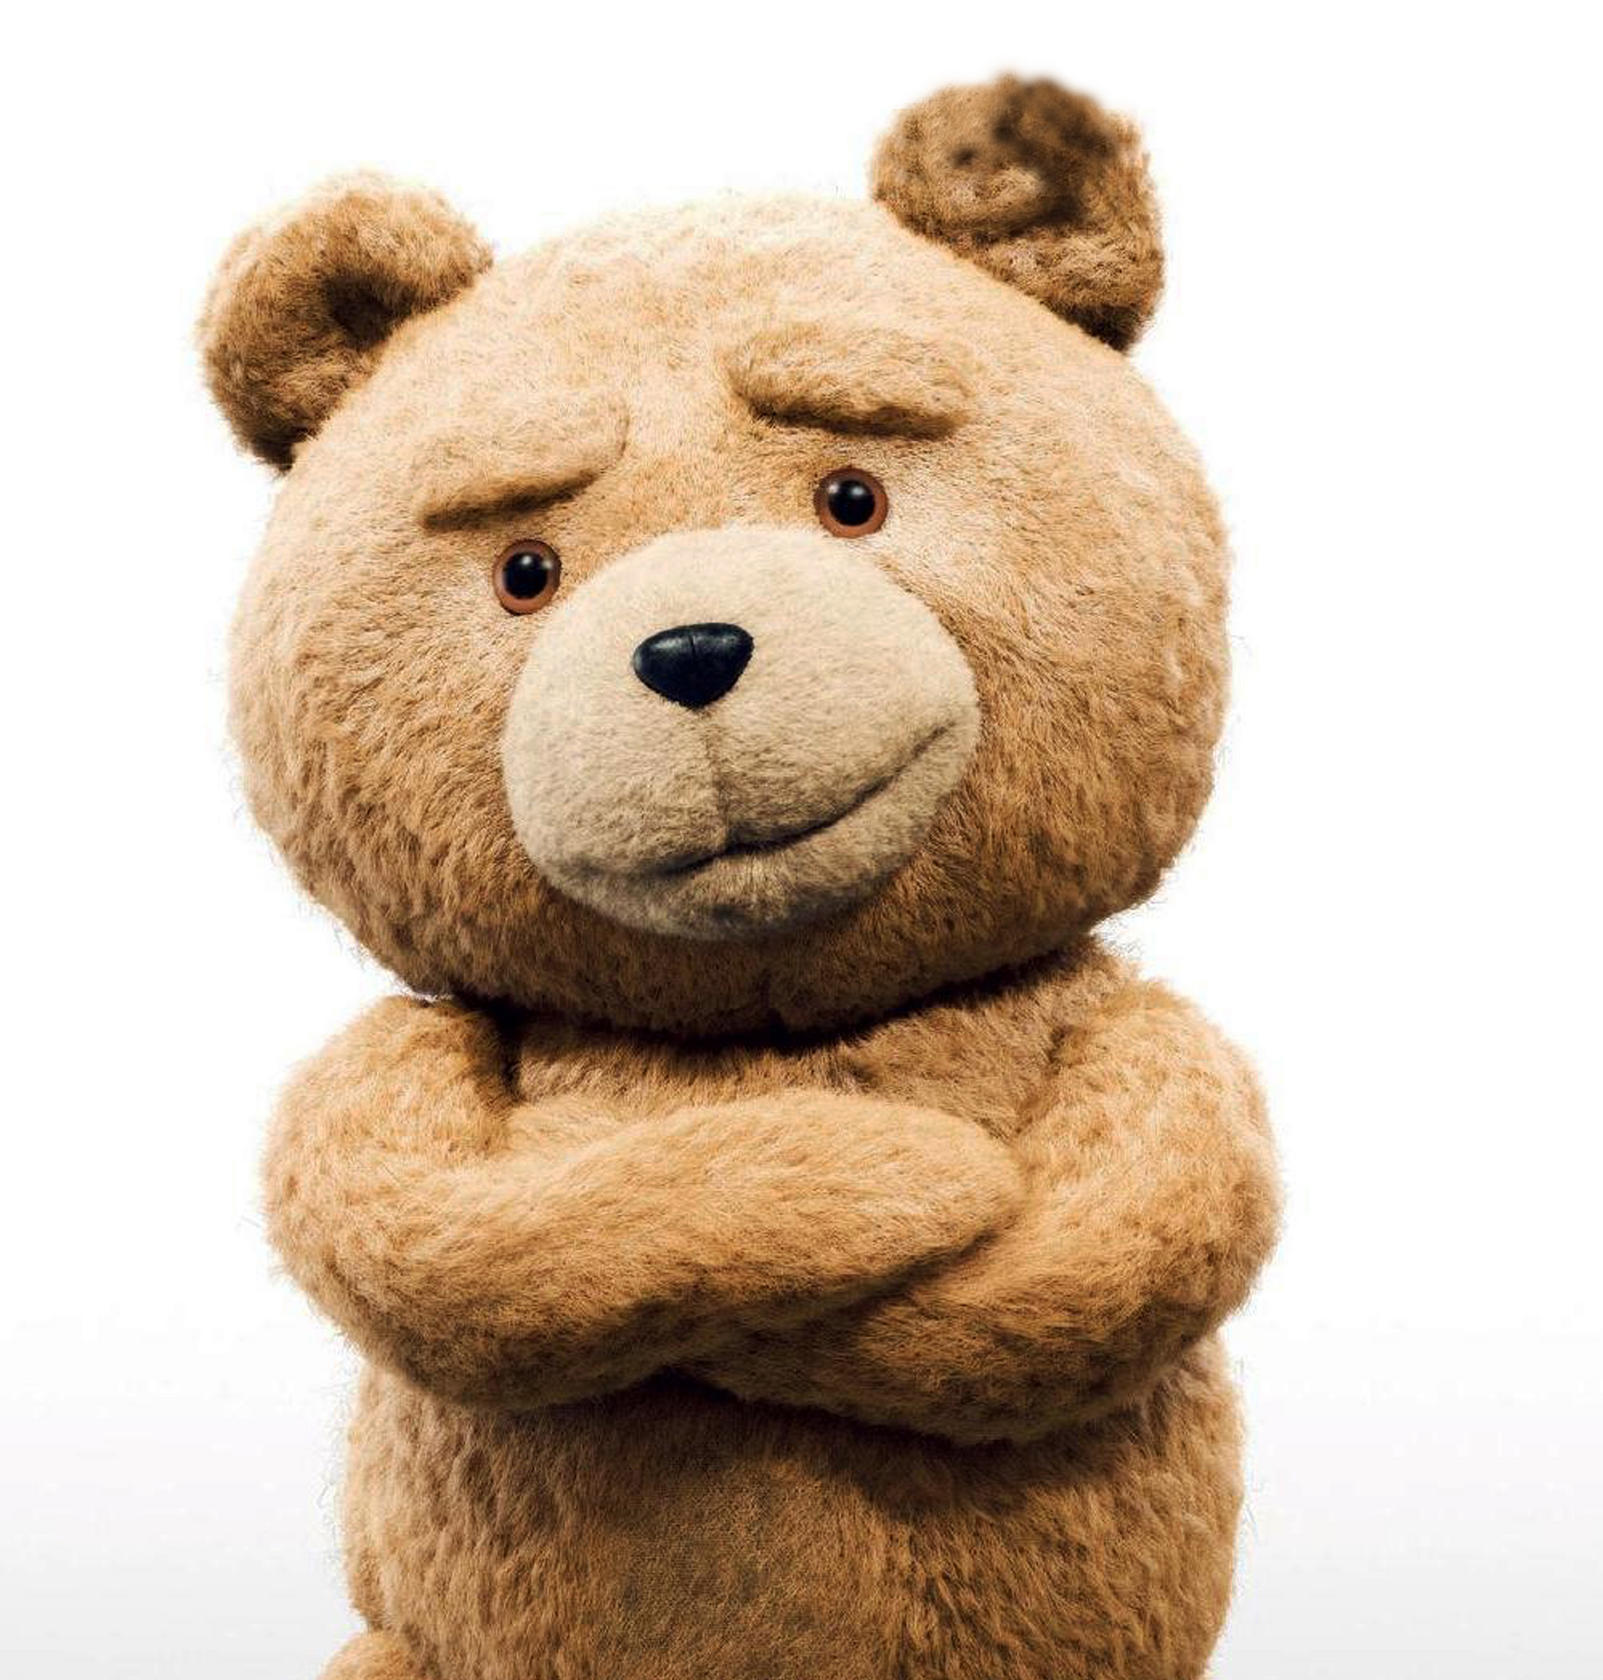 Ted, the foul-mouthed living bear, is not a good role model for children.